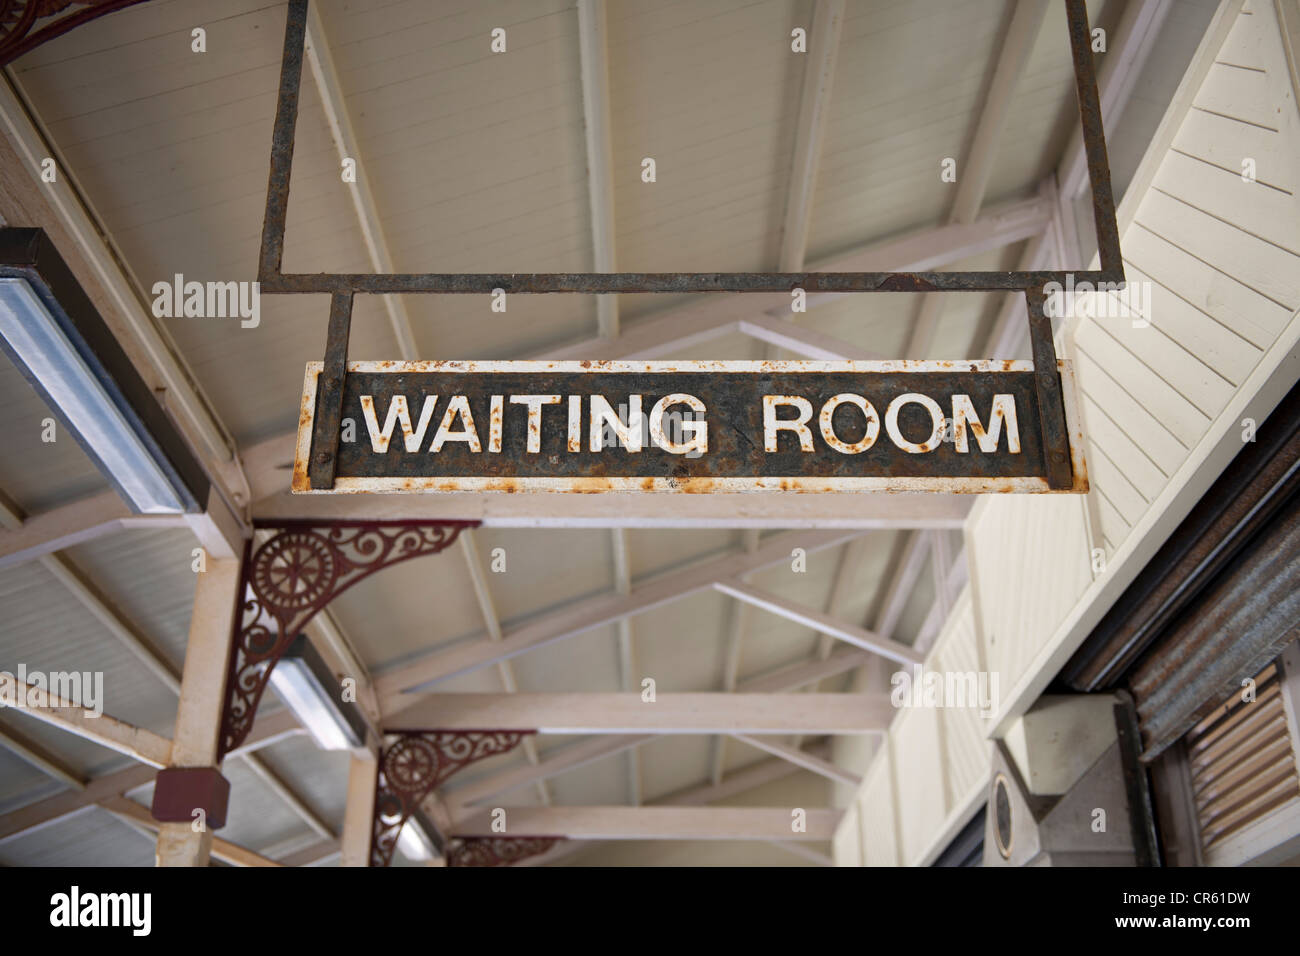 Waiting room sign at Whitehead railway station, County Antrim Northern Ireland Stock Photo